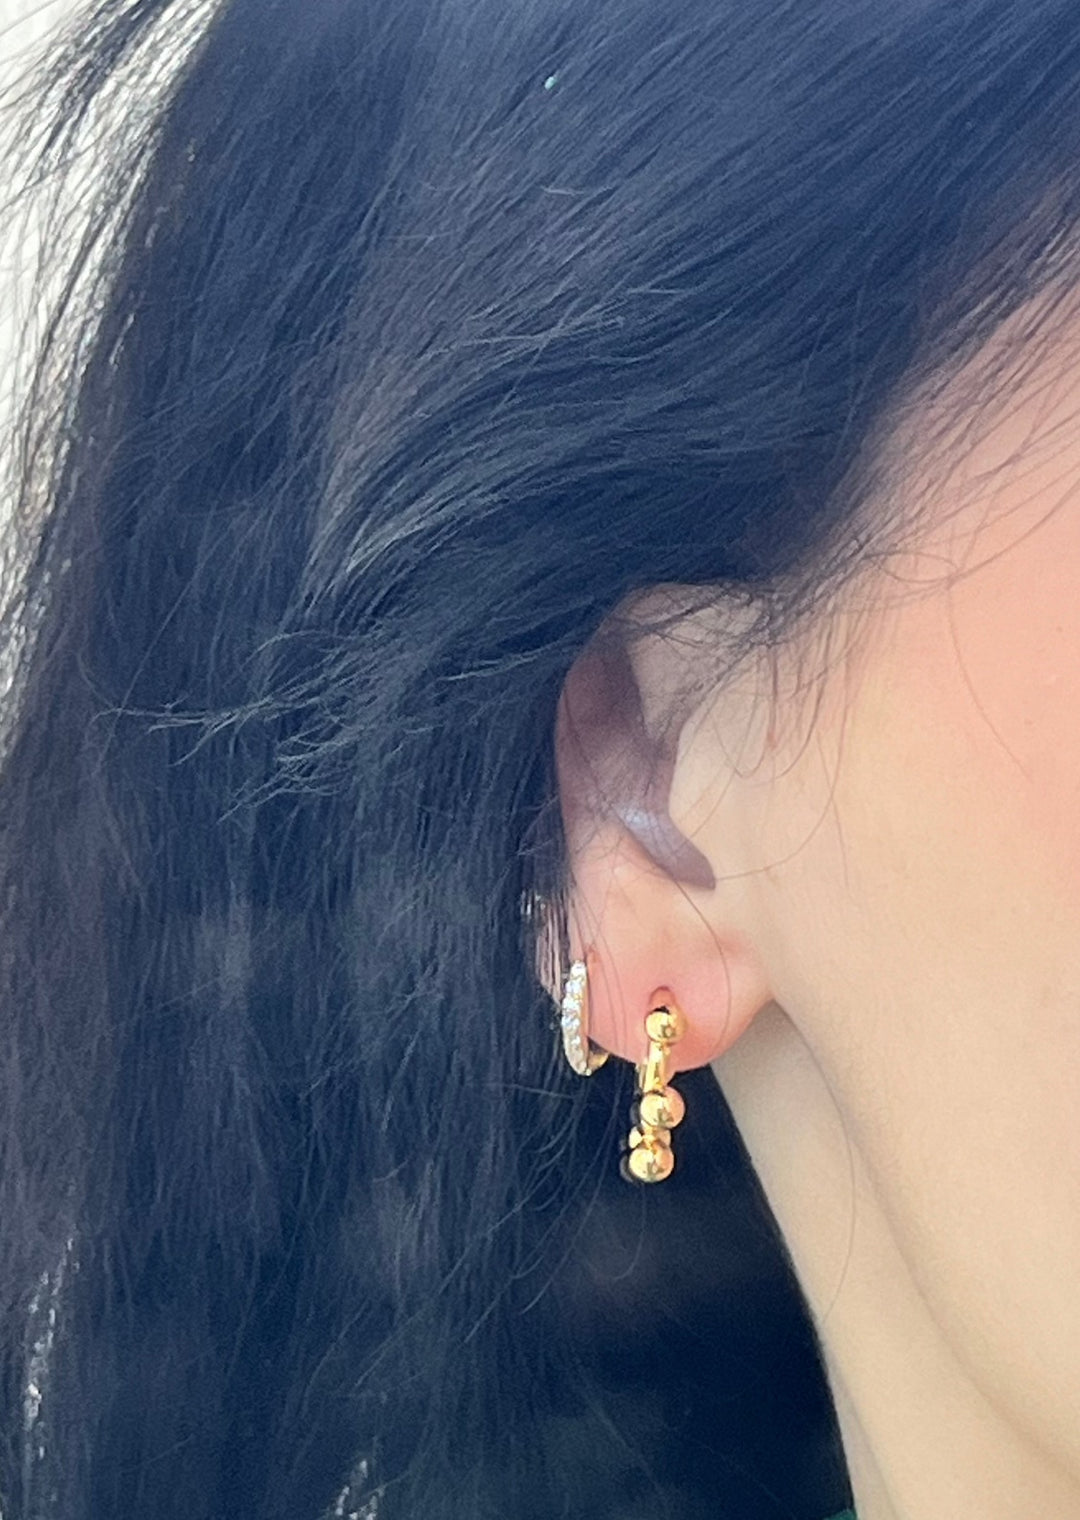 Donna Earrings, Jewelry, Adeline, Adeline, dallas boutique, dallas texas, texas boutique, women's boutique dallas, adeline boutique, dallas boutique, trendy boutique, affordable boutique